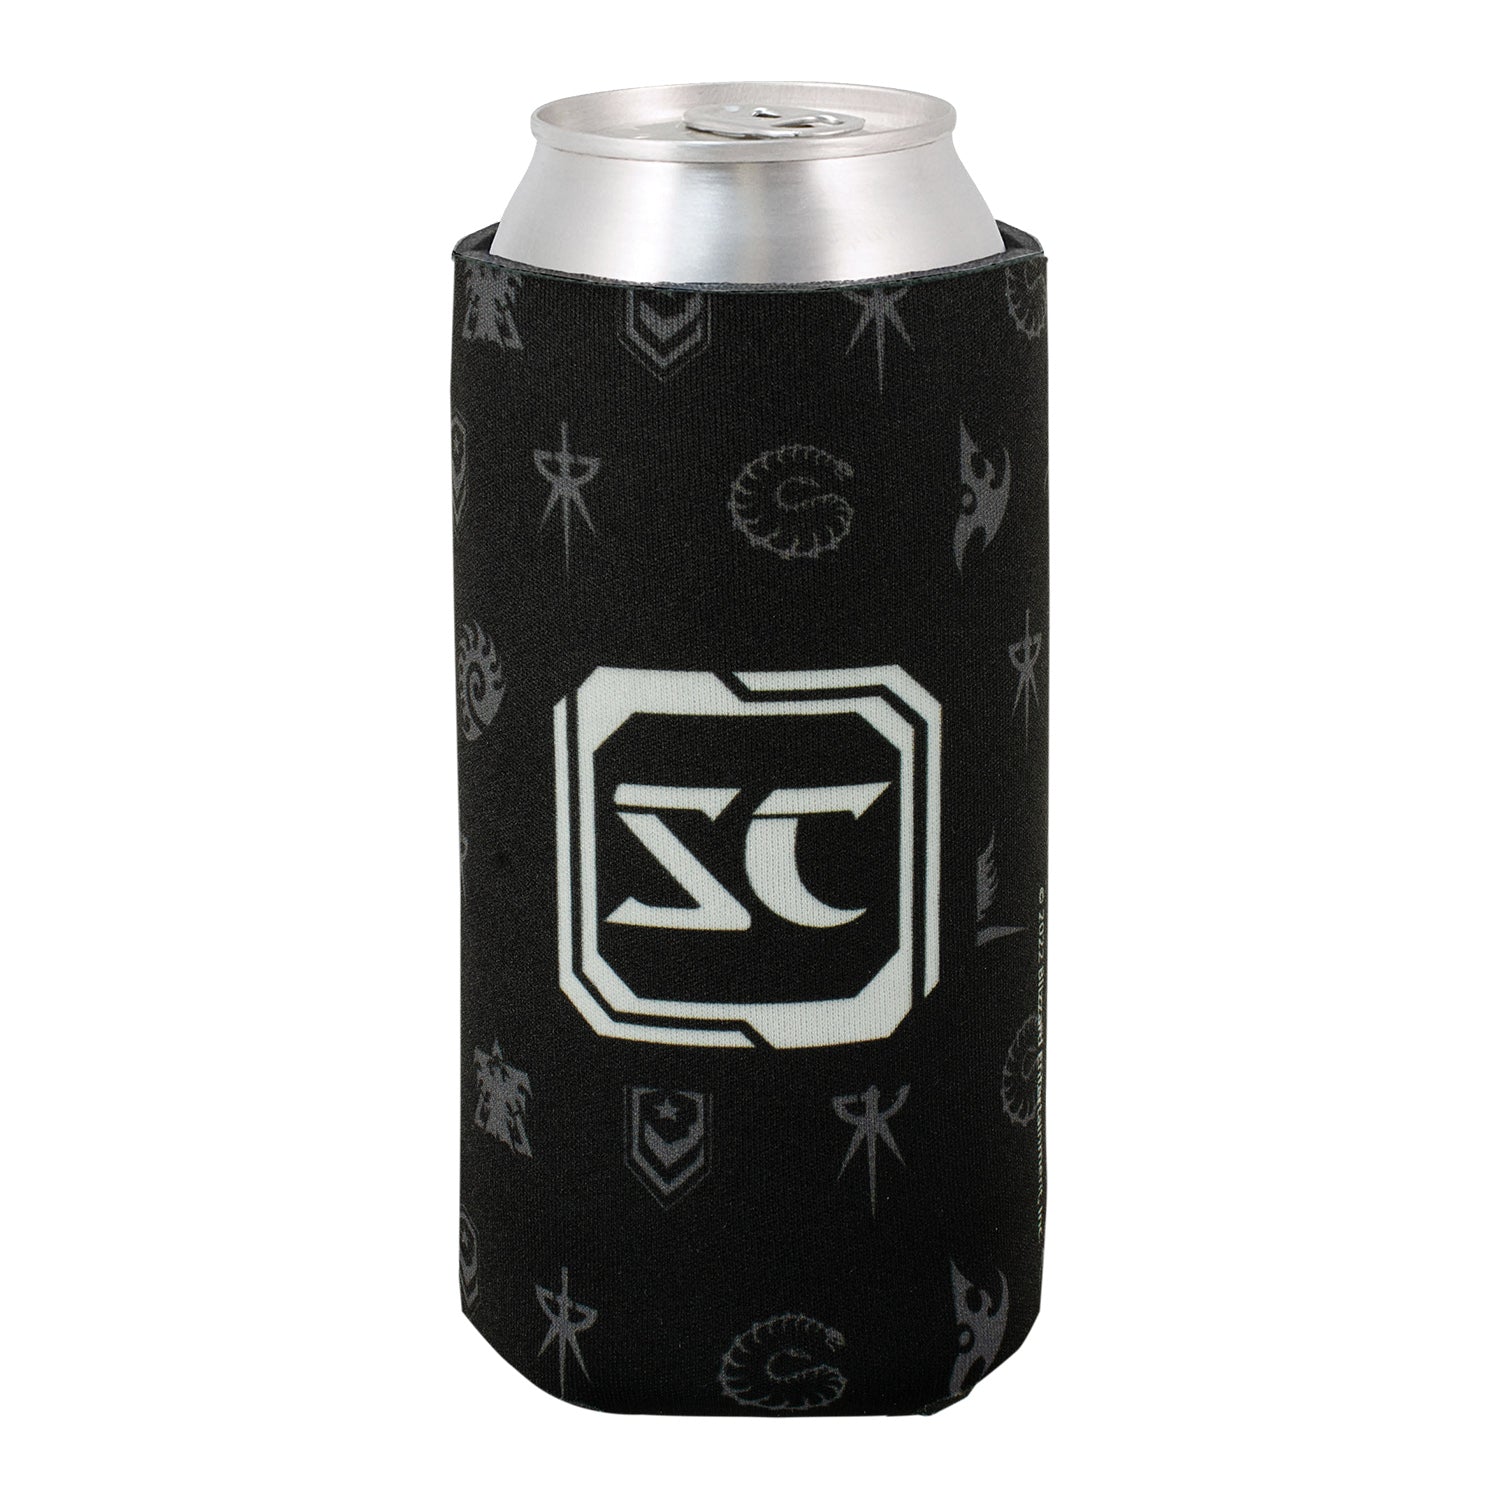 StarCraft 16oz Can Cooler - Back View